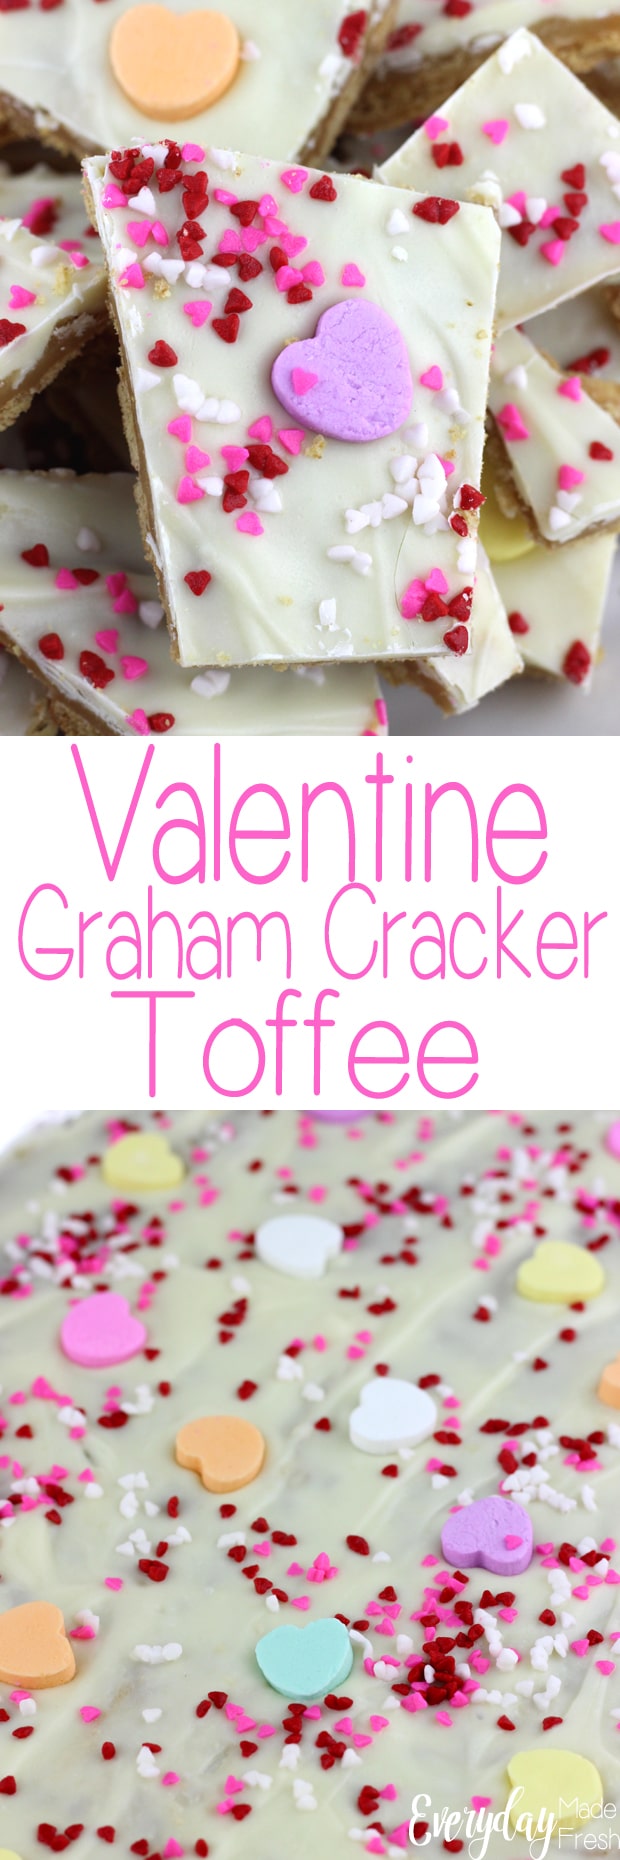 Sweet, crunchy, and irresistible - this Valentine Graham Cracker Toffee is a great sweet treat to keep for yourself or pass on to friends. | EverydayMadeFresh.com